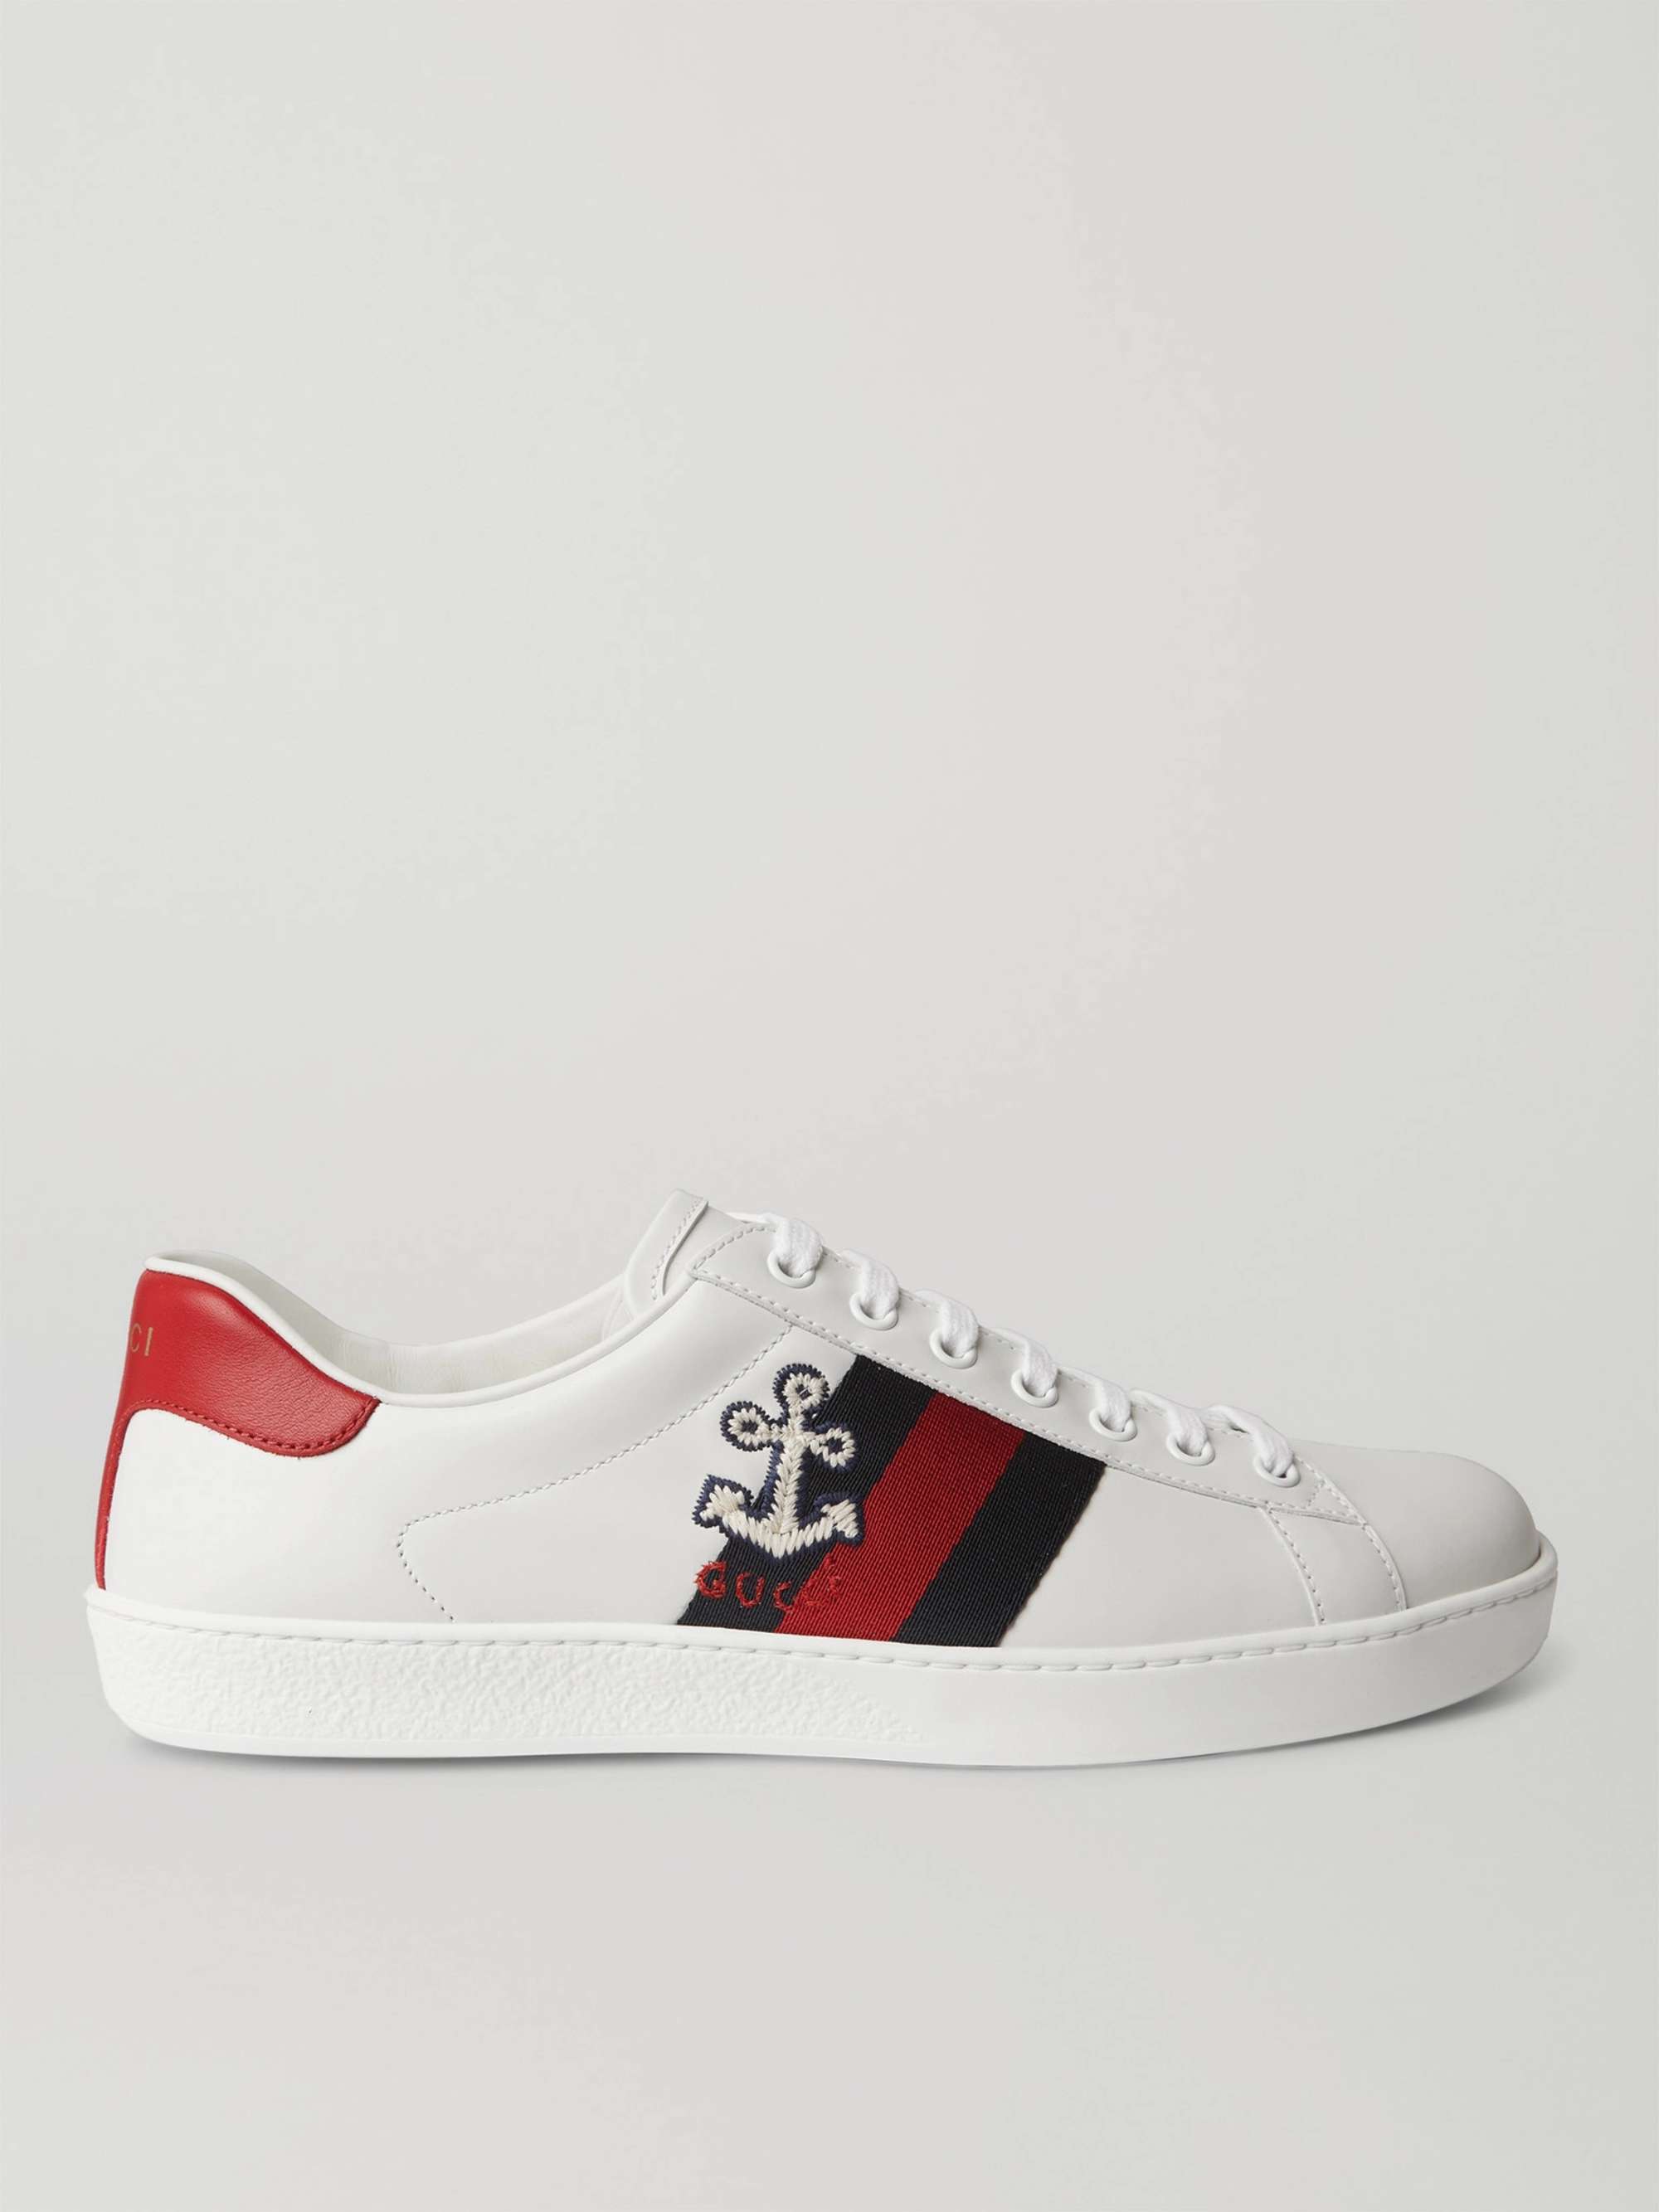 GUCCI Ace Webbing-Trimmed Embroidered Leather Sneakers | MR PORTER